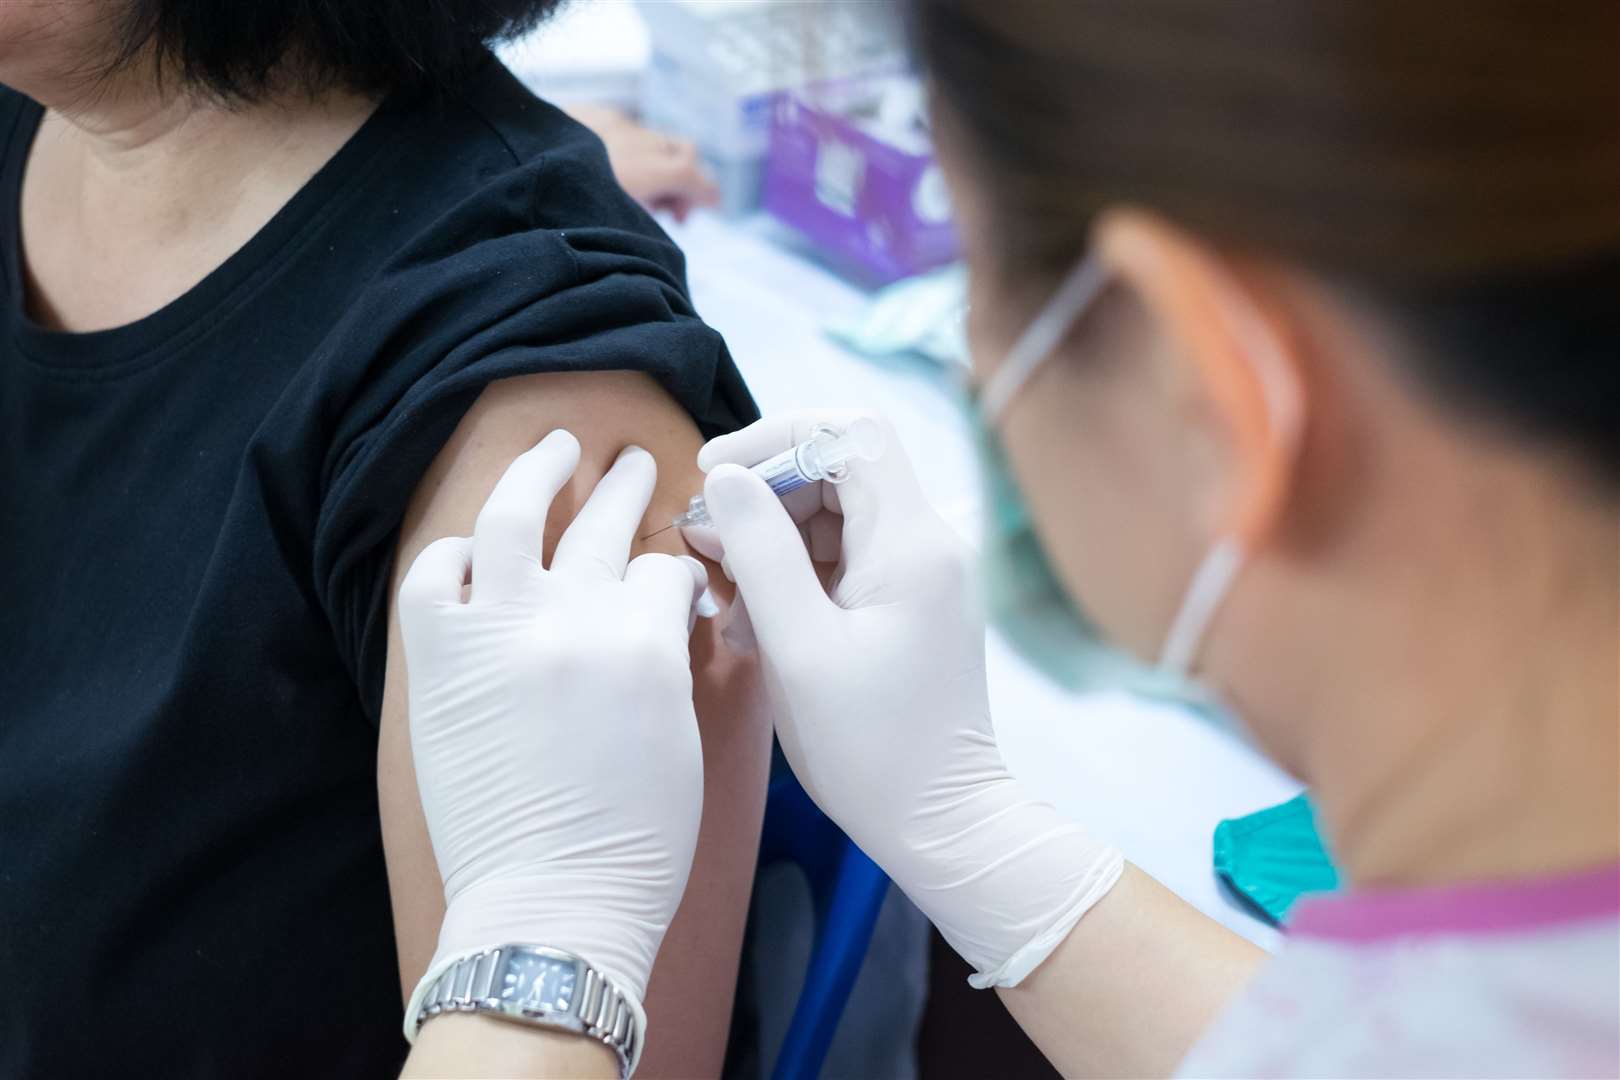 The vaccine roll-out has been a huge success - but should employers insist on it?